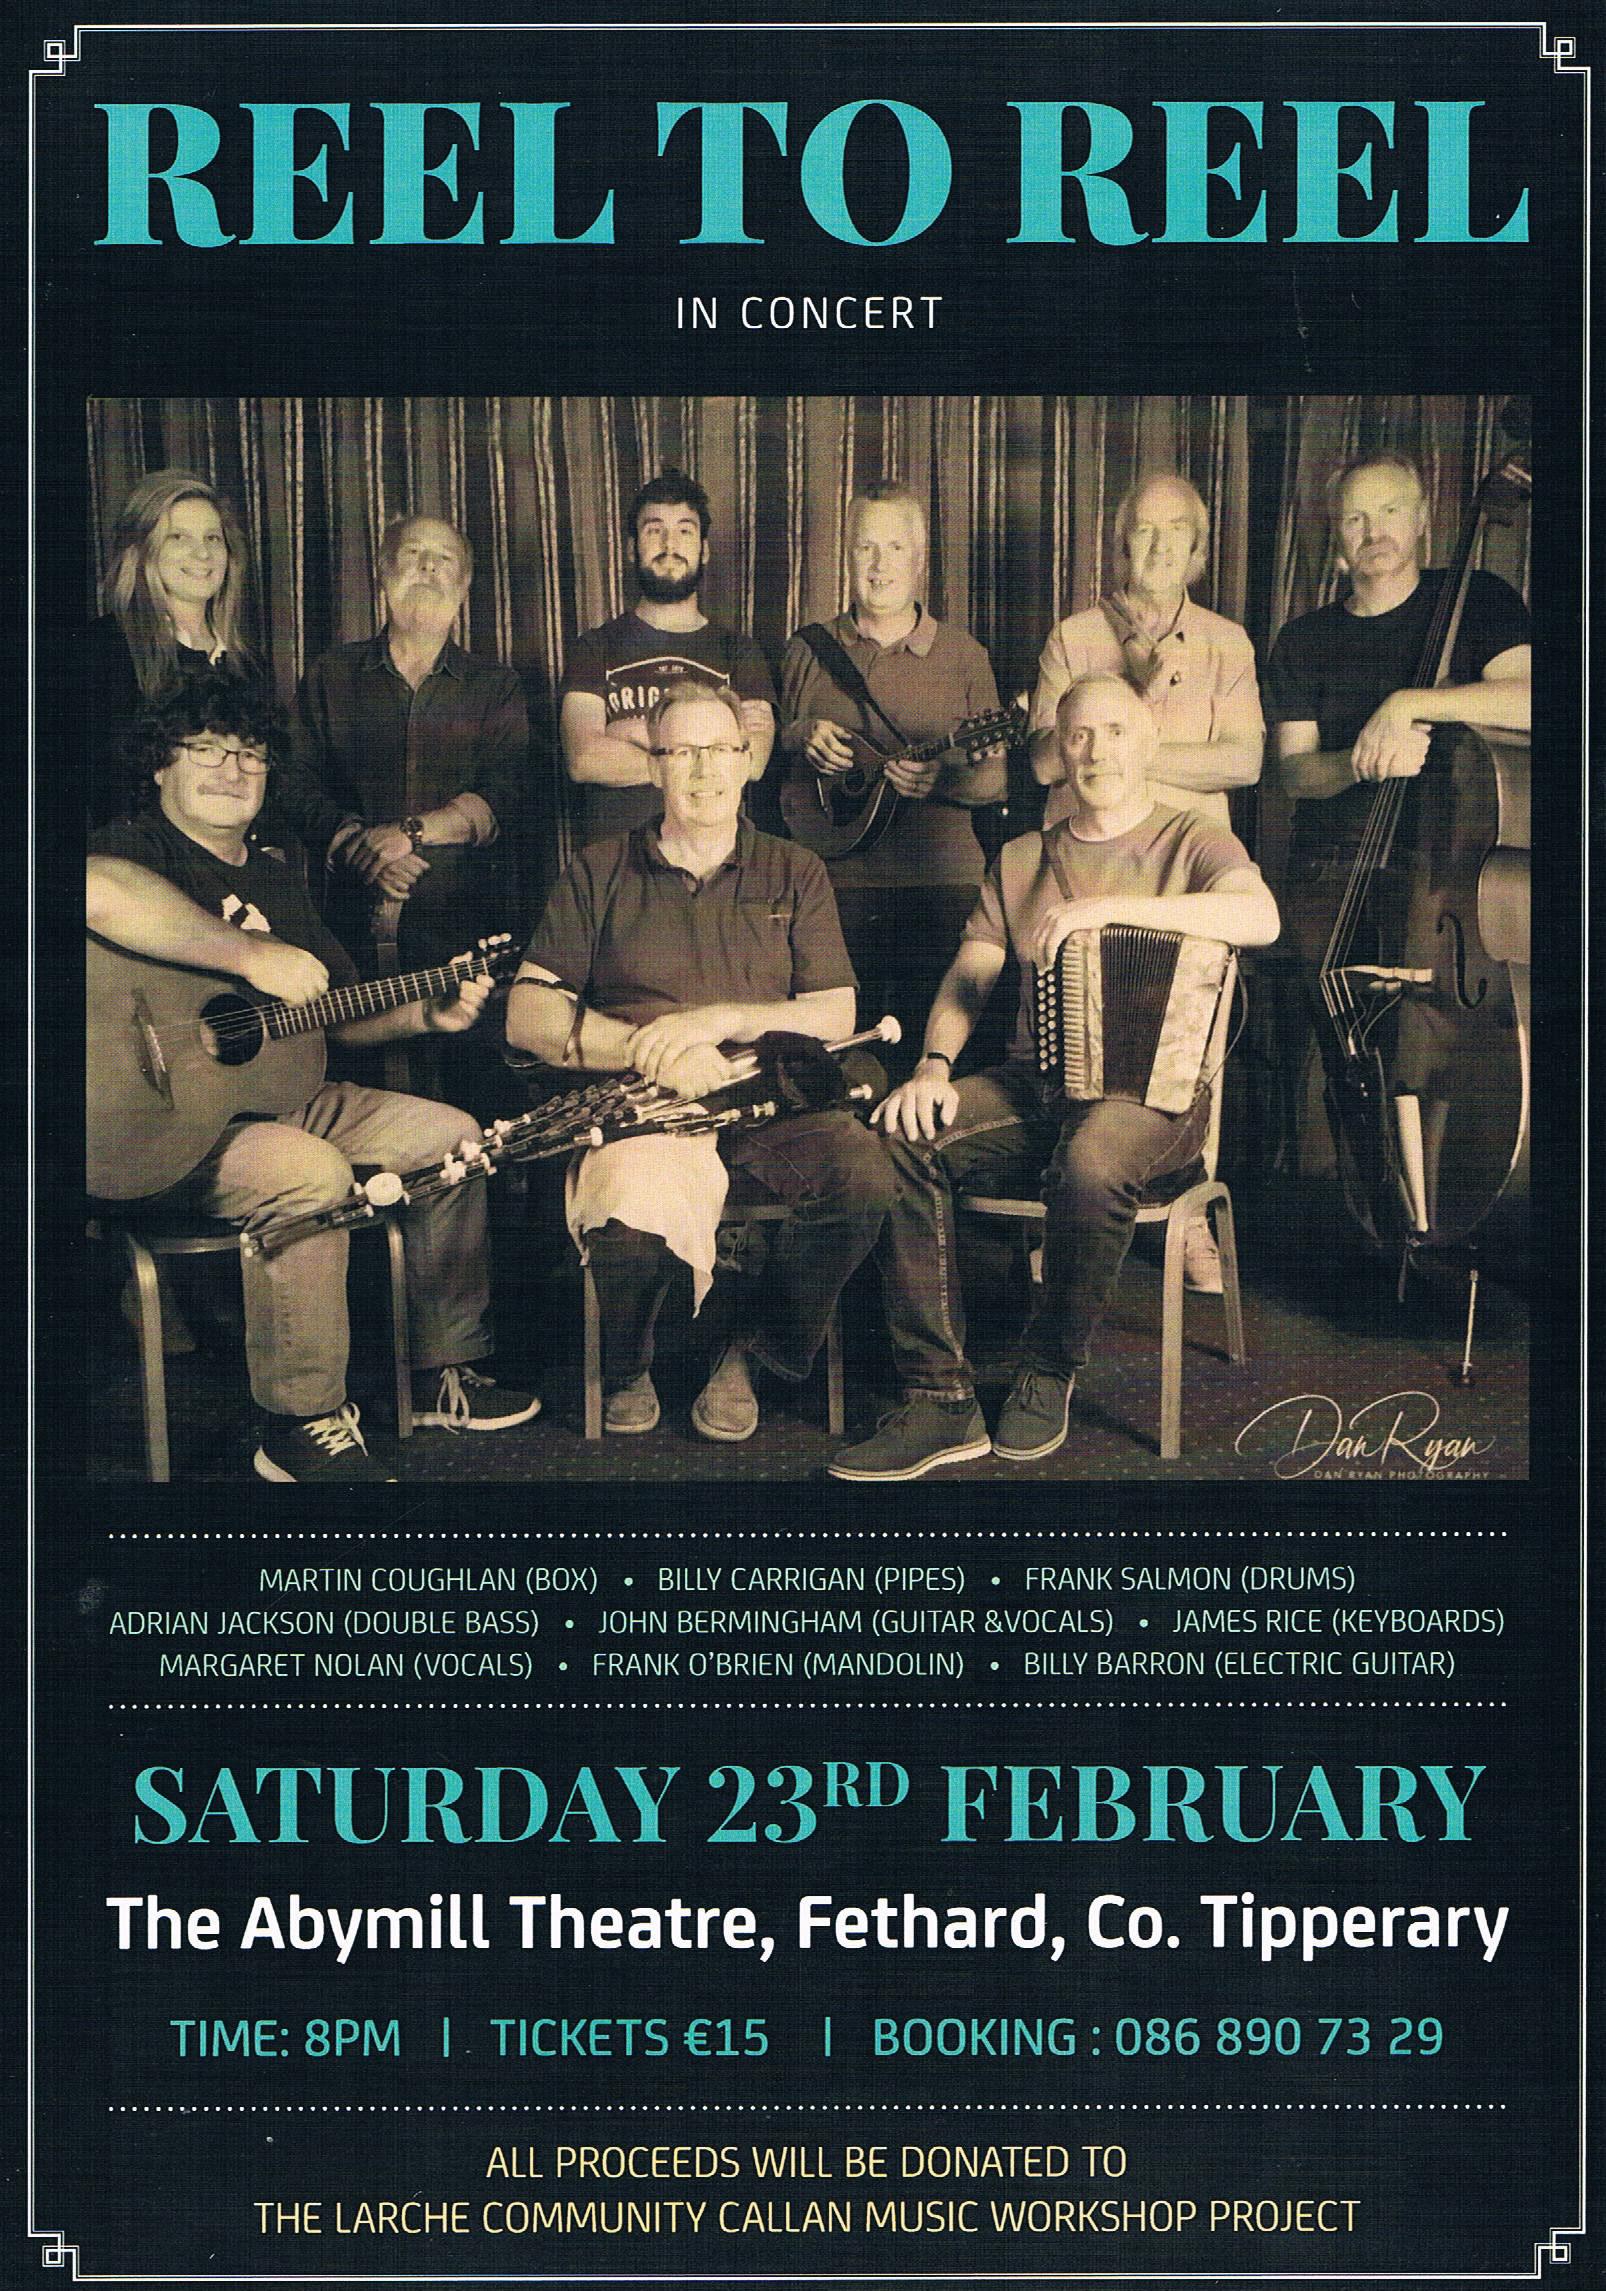 Exciting 'Reel to Reel' concert coming to Abymill

On Saturday, February 23, the Abymill Theatre will host an extraordinary 'Reel to Reel' Concert starting at 8pm. The concert will feature a nine piece band, which was just a little big for organiser, John Berminghamâ€™s usual venue at Crocanoir. Â So they decided to move to the beautiful Abymill Theatre in Fethard instead. Â Tickets can be purchased from John at 086-8907329.

'Reel to Reel' will feature the unusual fusion of uileann pipes, accordion, cello, keyboard, drums, bass, mandolin, electric and acoustic guitars, to create a magical, unique sound across a wide range of musical genres. All proceeds of the night will be donated to the L'Arche Community, Callan. The first community in Ireland was founded in 1978 in Kilmoganny, County Kilkenny. L'Arche in Ireland is currently home to over fifty people with intellectual disabilities and the assistants with whom they share life. 